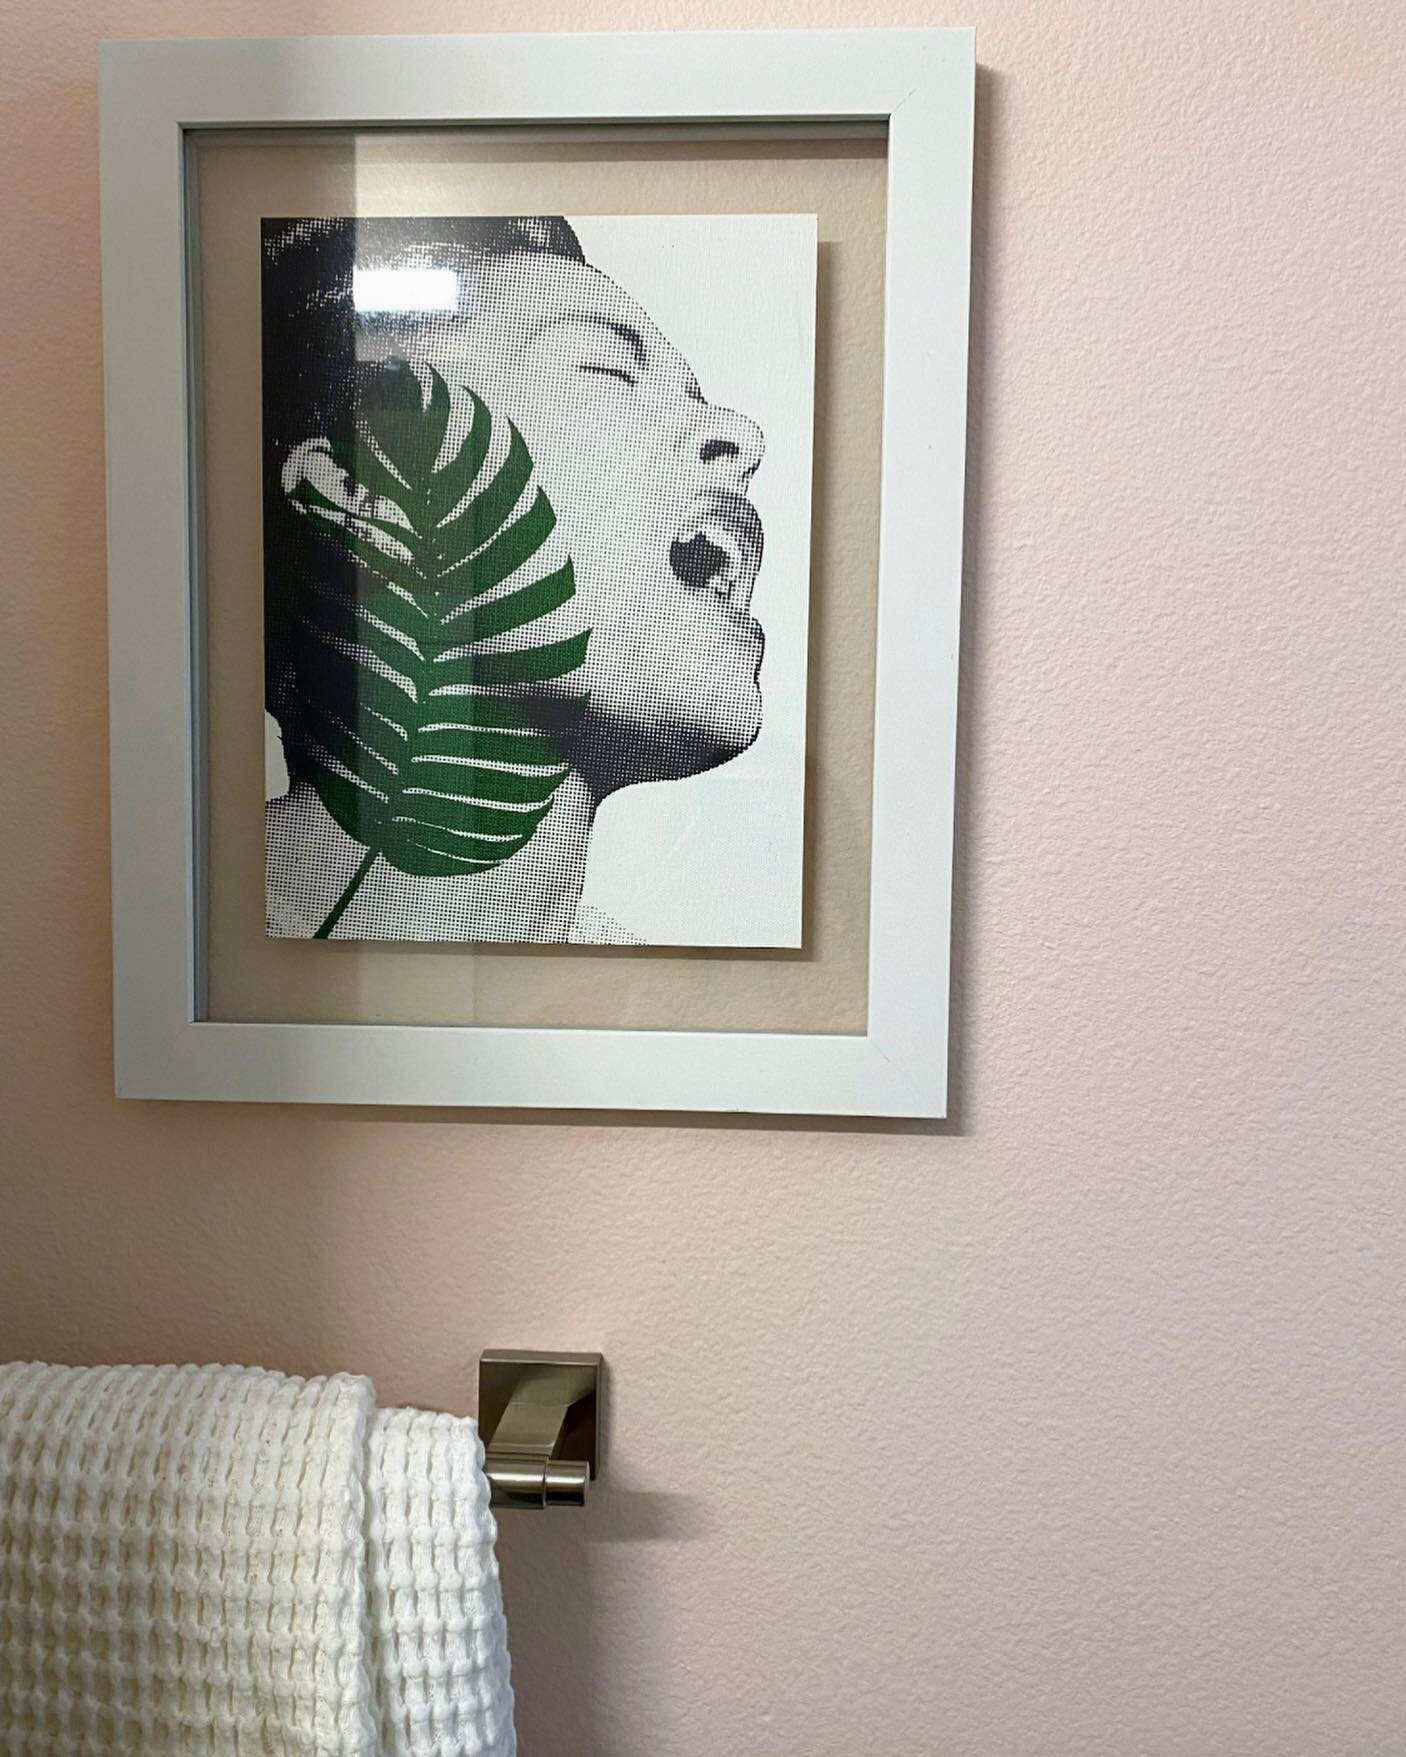 When you find out that your clients love Billie Holliday as much as you do 💗💗💗

-
-
-
#ladysingstheblues #billieholiday #designinspiration #powderroomdesign #powderoomdecor #mybohovibes #vintagegems #bathroomfeels #ladesigner #interiorsla #howyouh